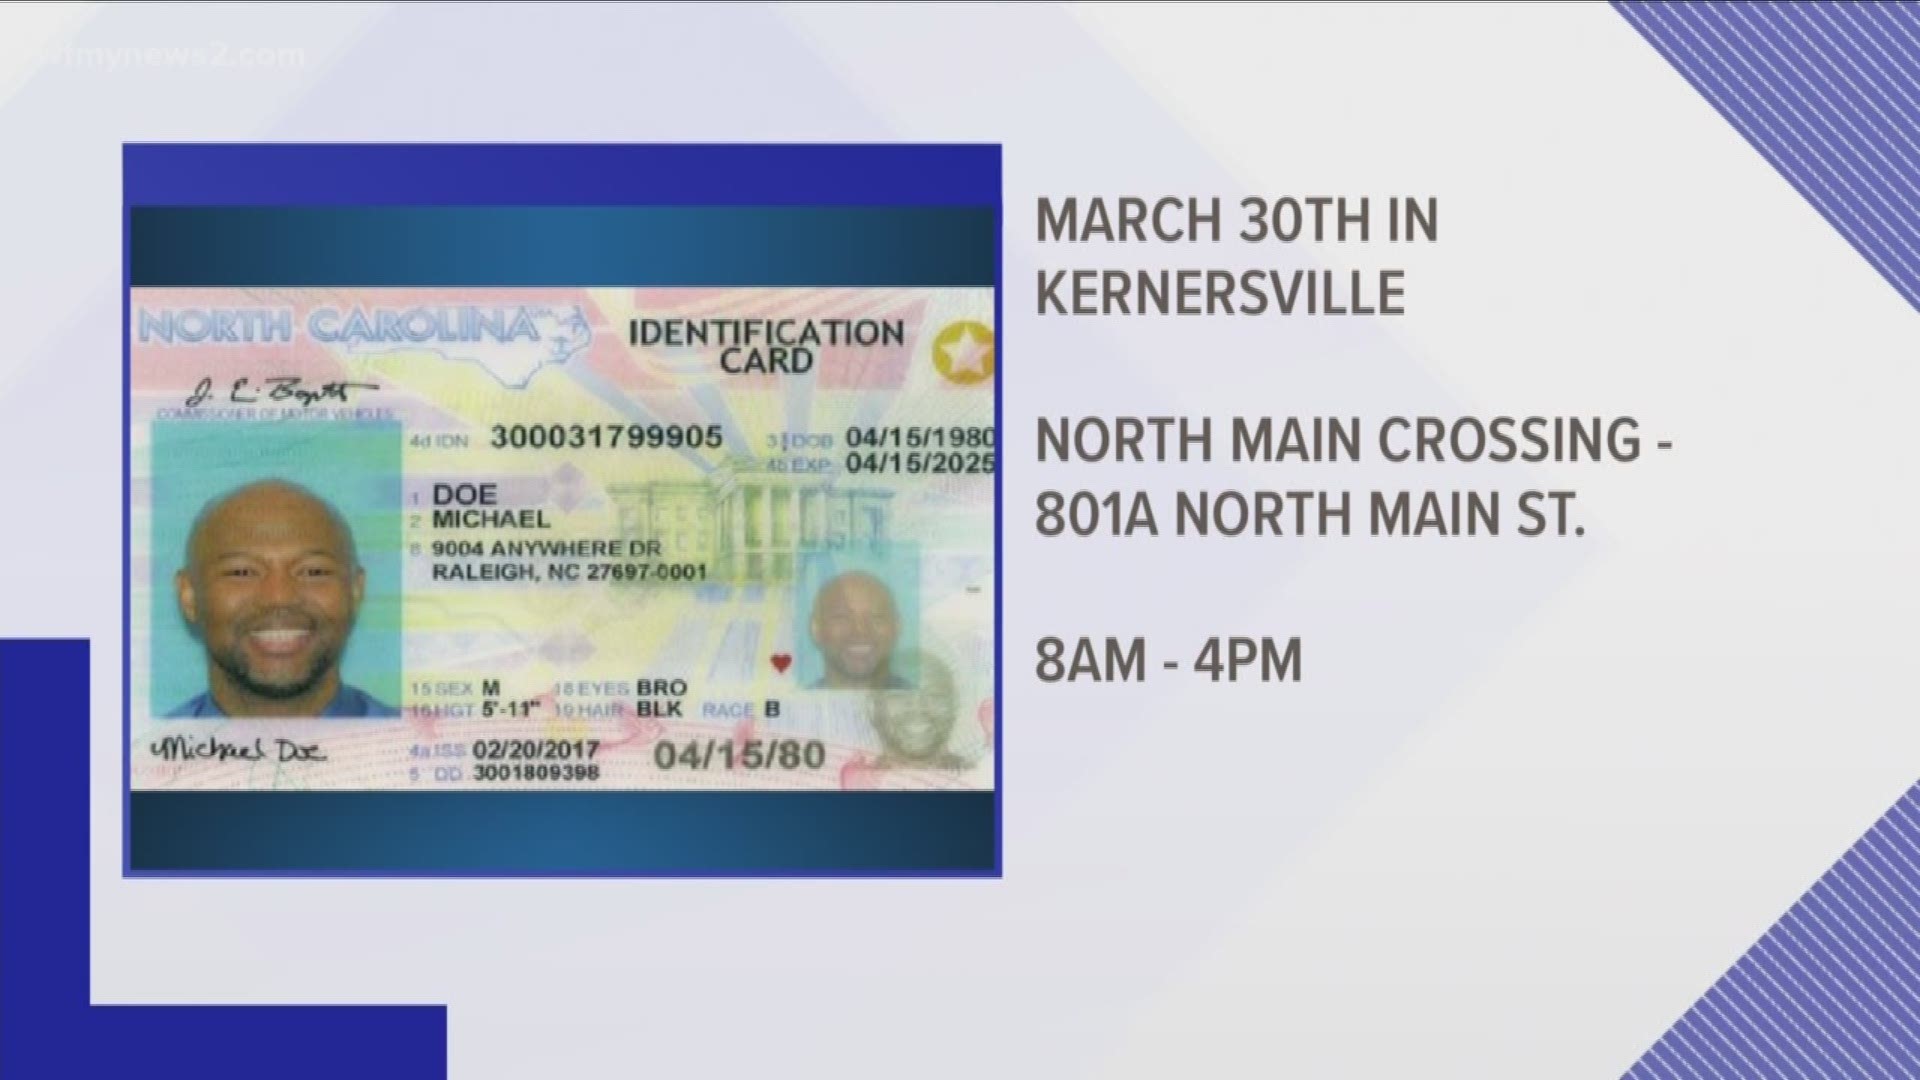 The NCDMV announced 2 express days for people to get a REAL ID in the Triad.